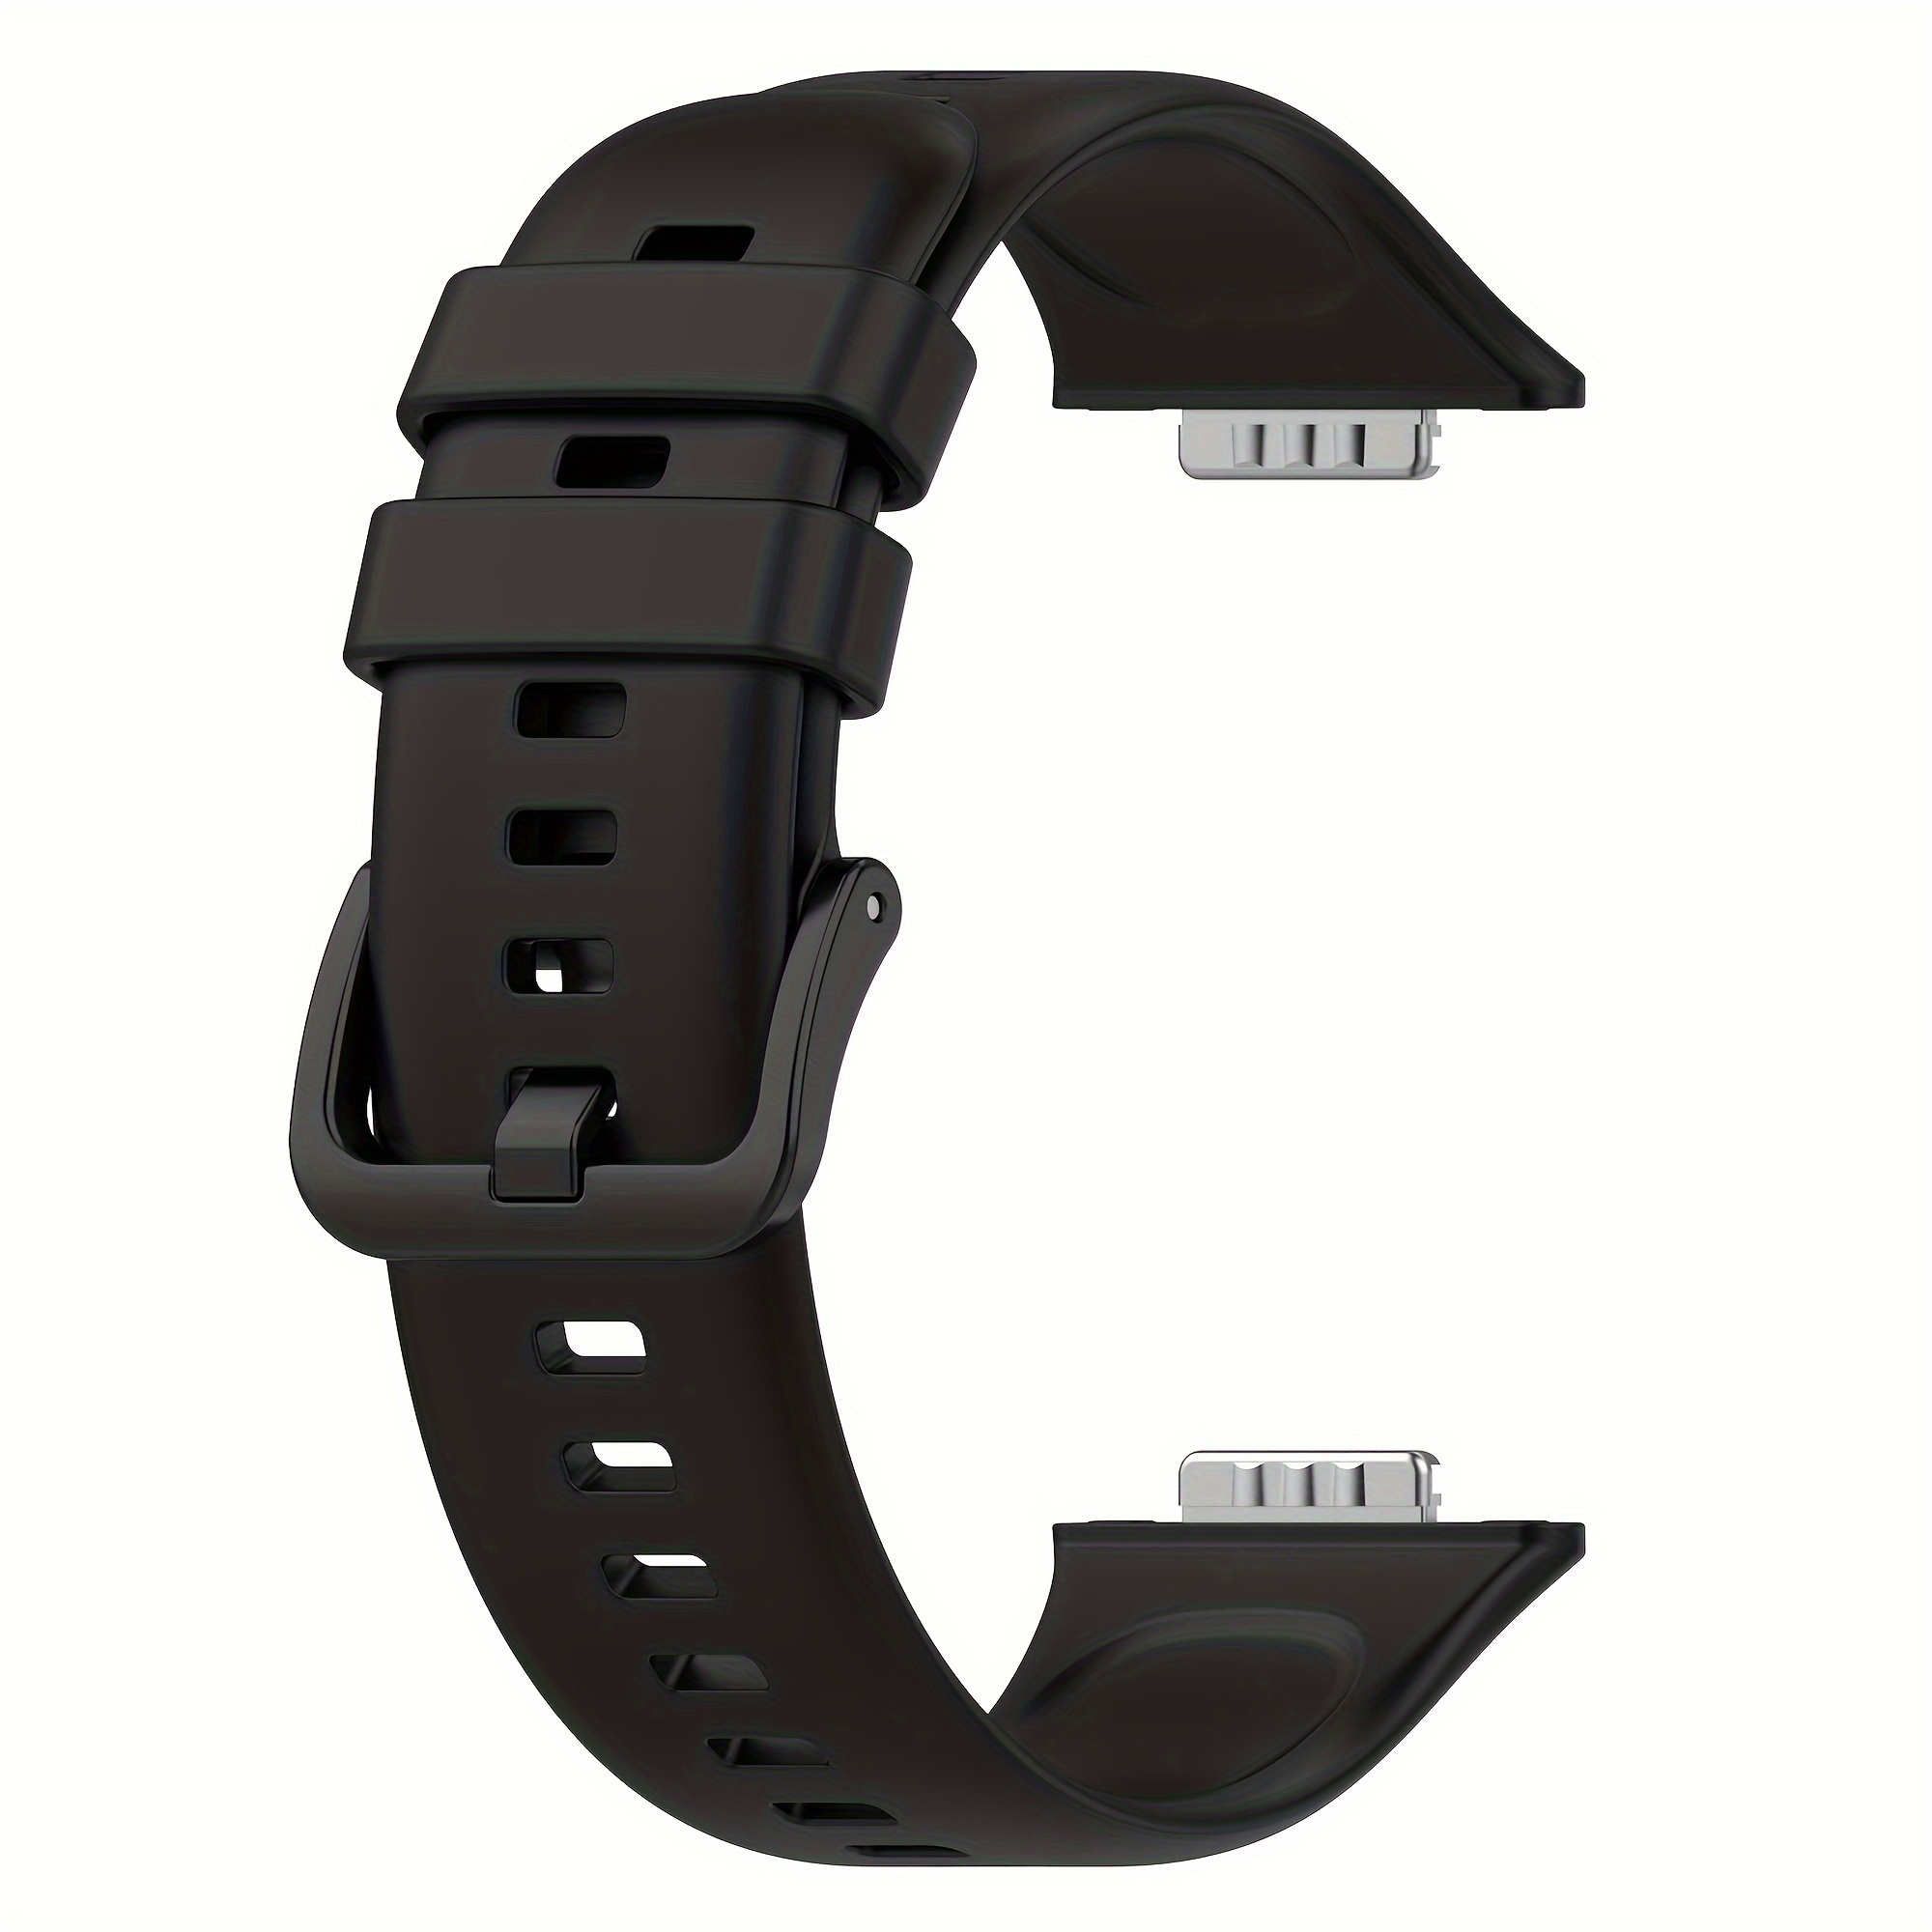 

Adjustable Black Silicone Watch Strap For - Sporty Replacement Band With 5.5" - 8.7" Wrist Size Compatibility